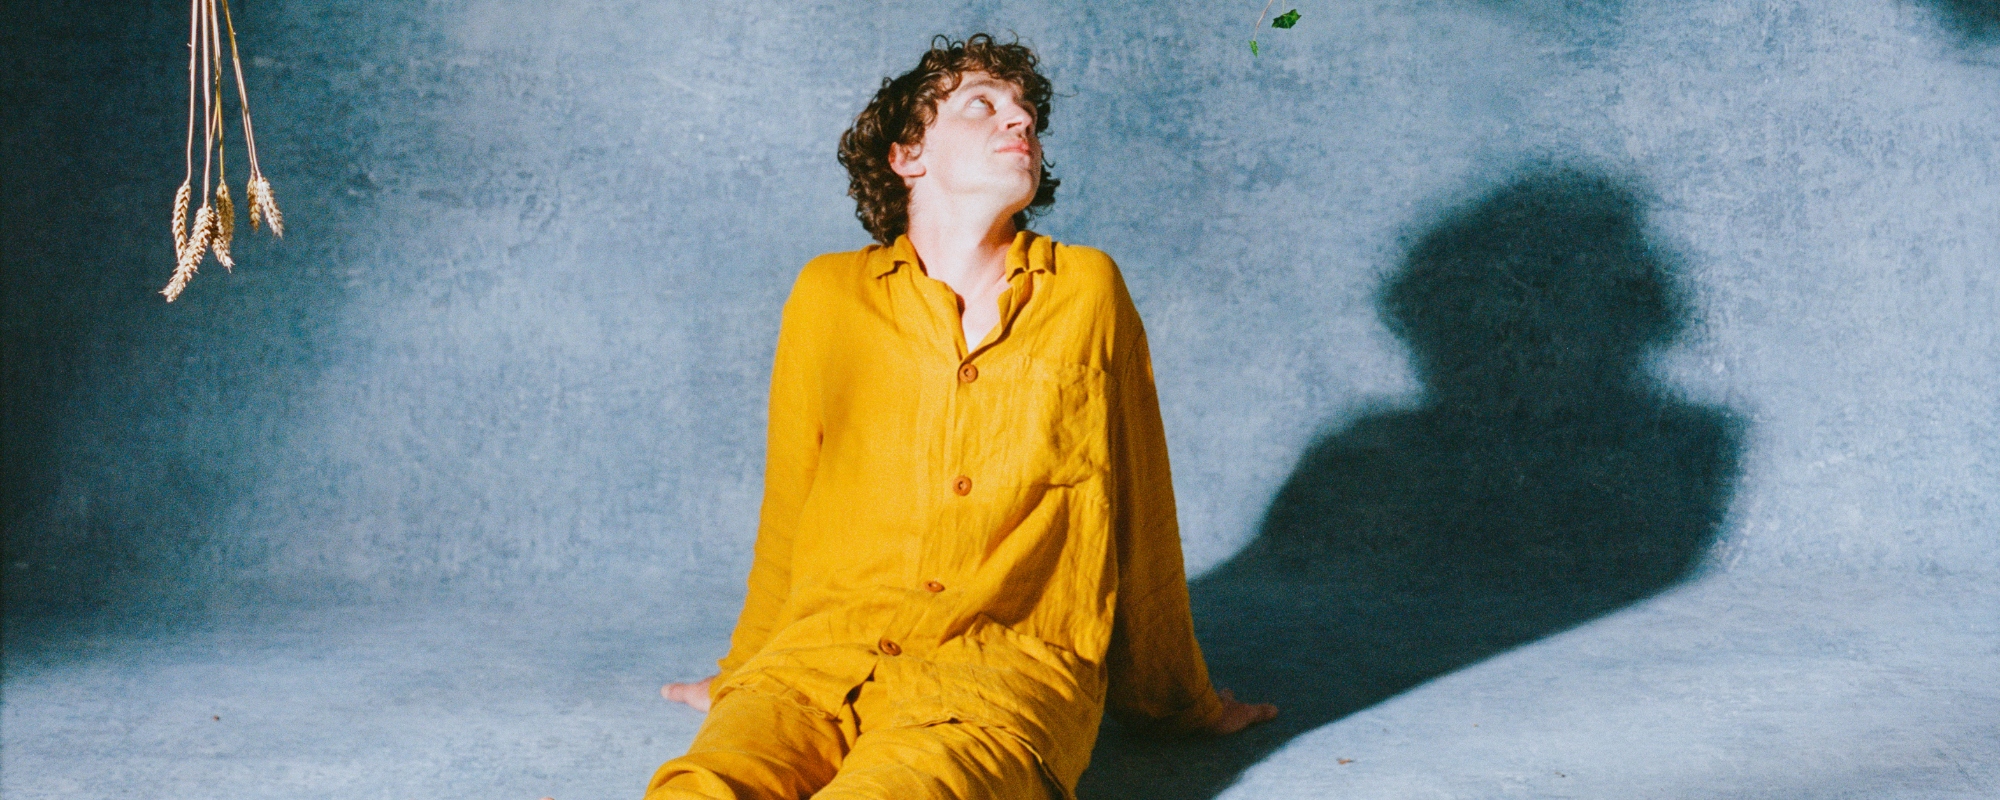 Cosmo Sheldrake Releases New Single “Old Ocean” as a Response to Environmental Threats